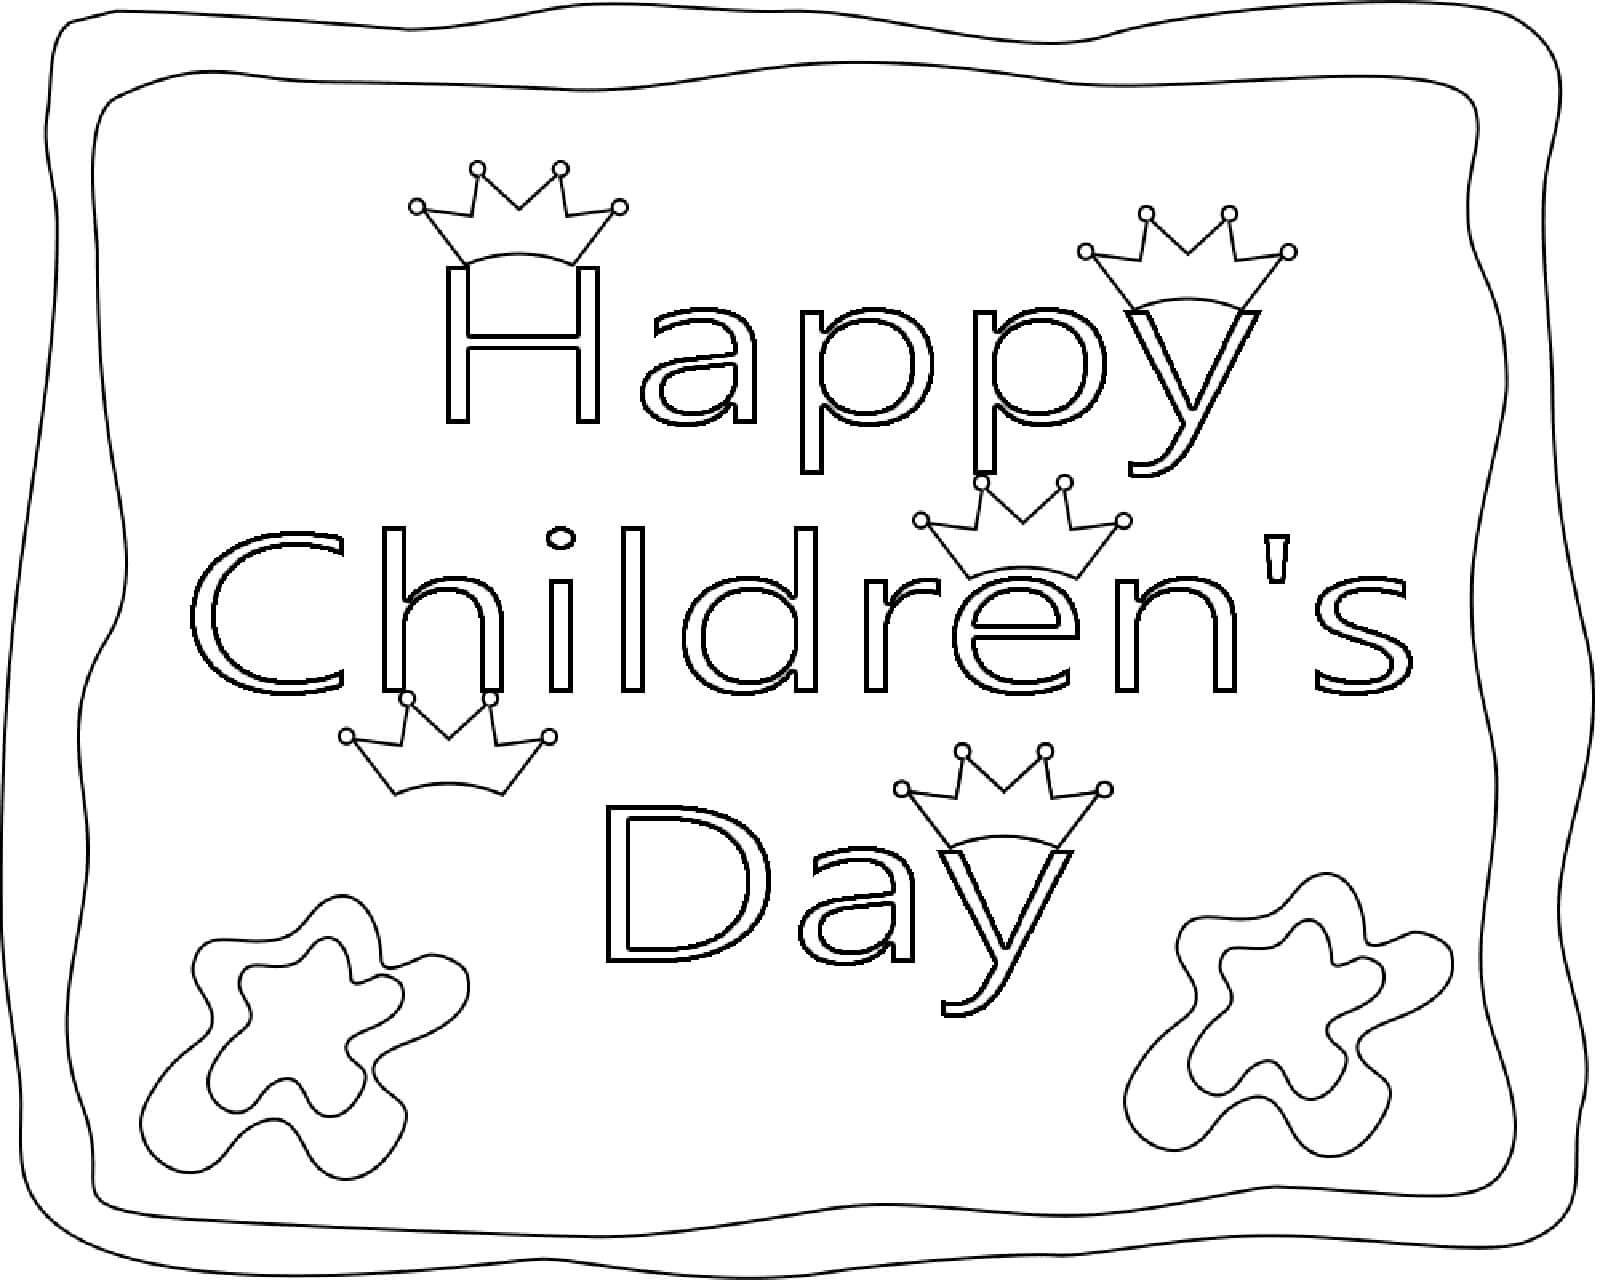 Happy International Children Day Logo Photos and Images | Shutterstock